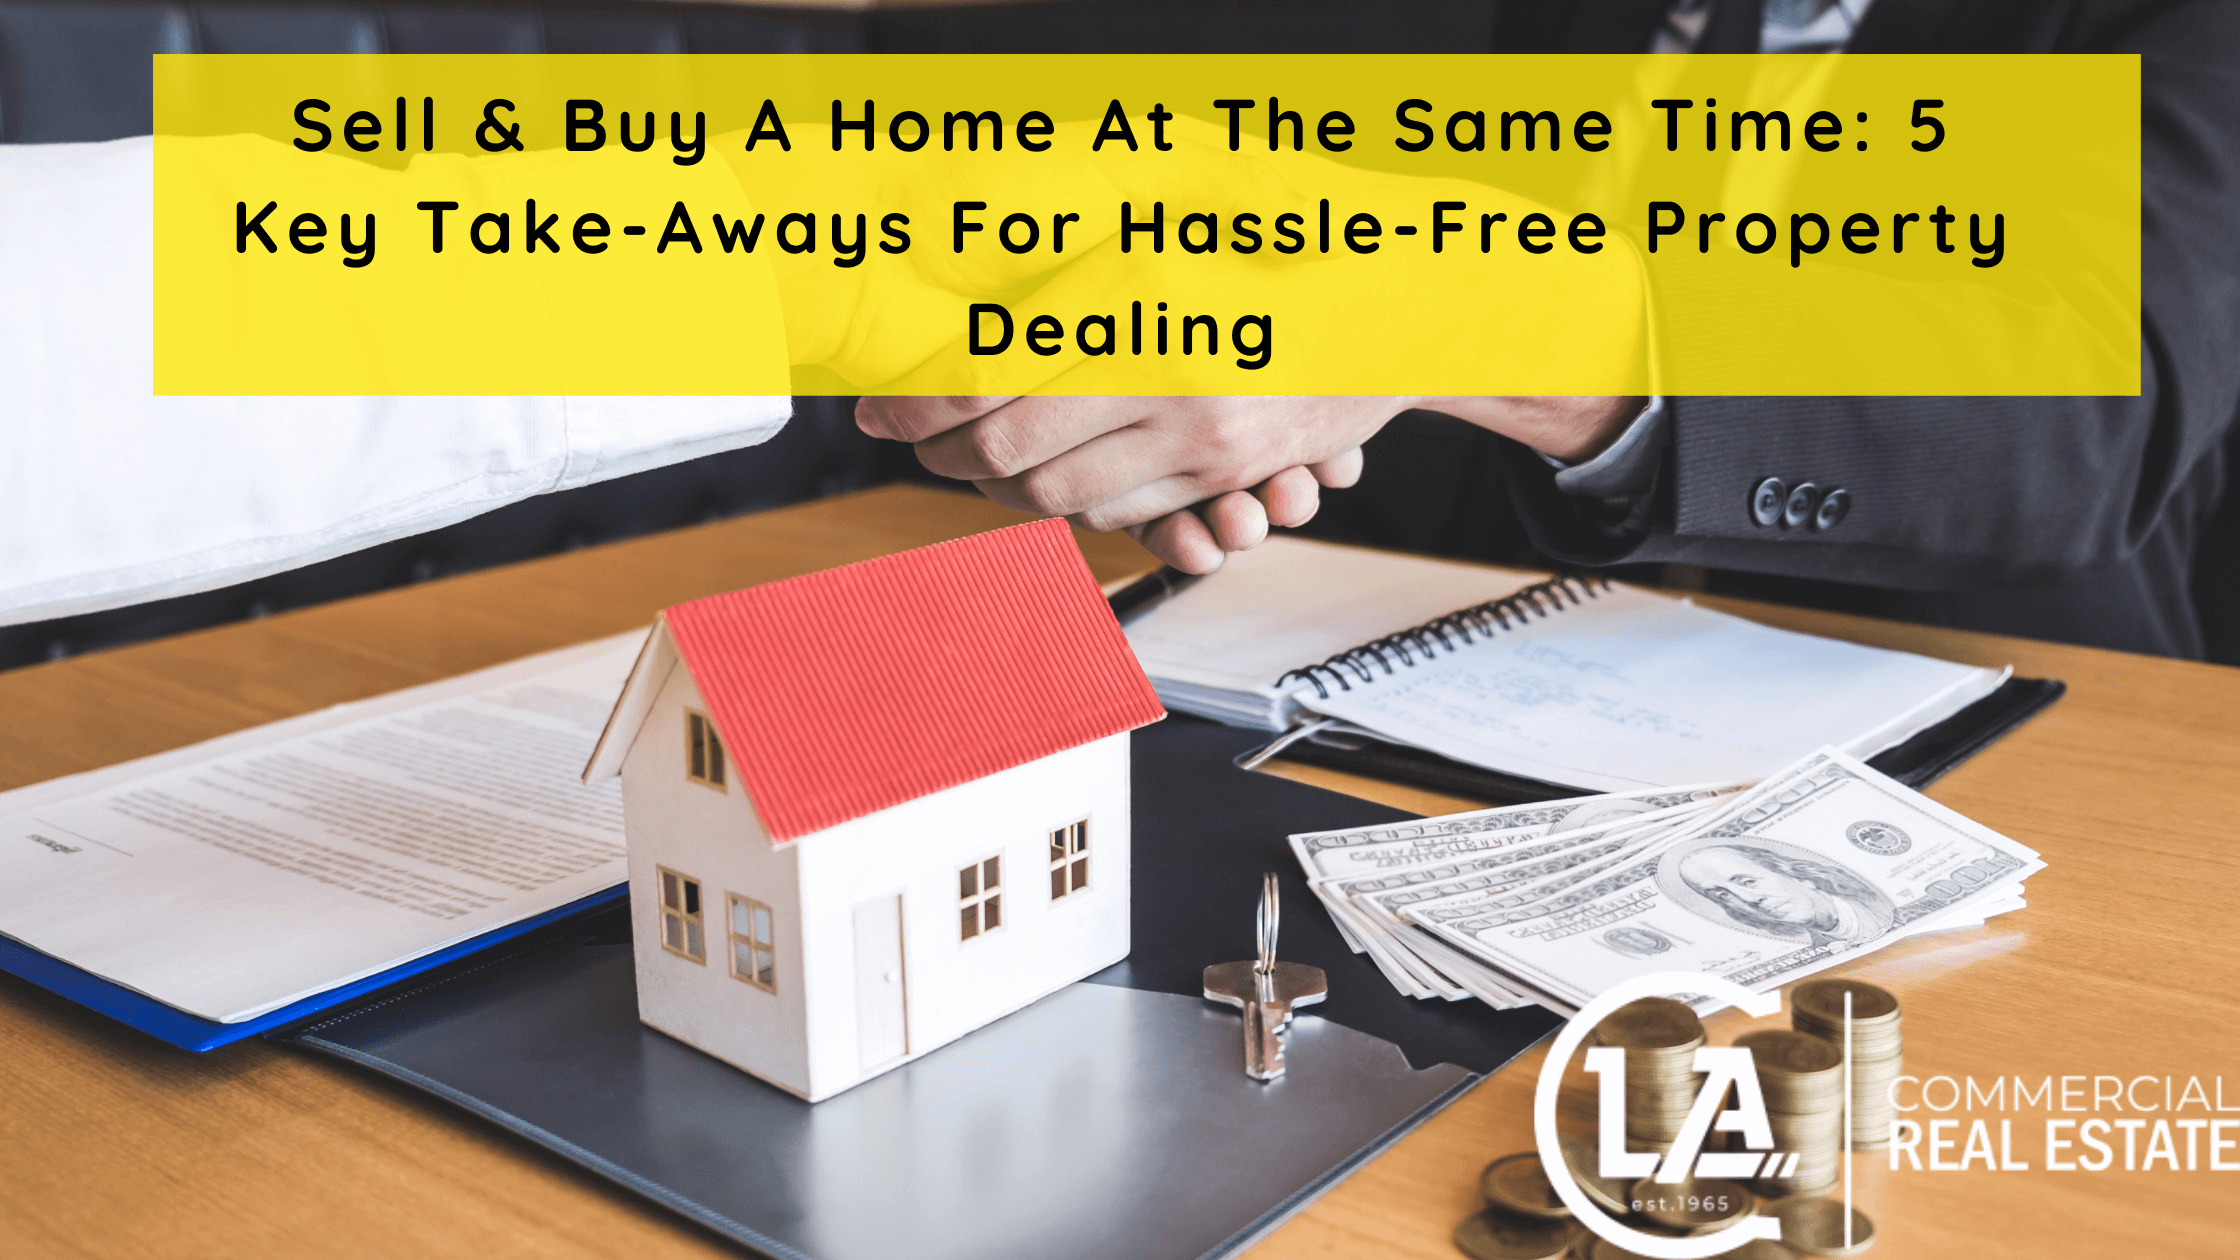 Sell & Buy A Home At The Same Time: 5 Key Take-Aways For Hassle-Free Property Dealing - CLA Real Estate Corpus Christi